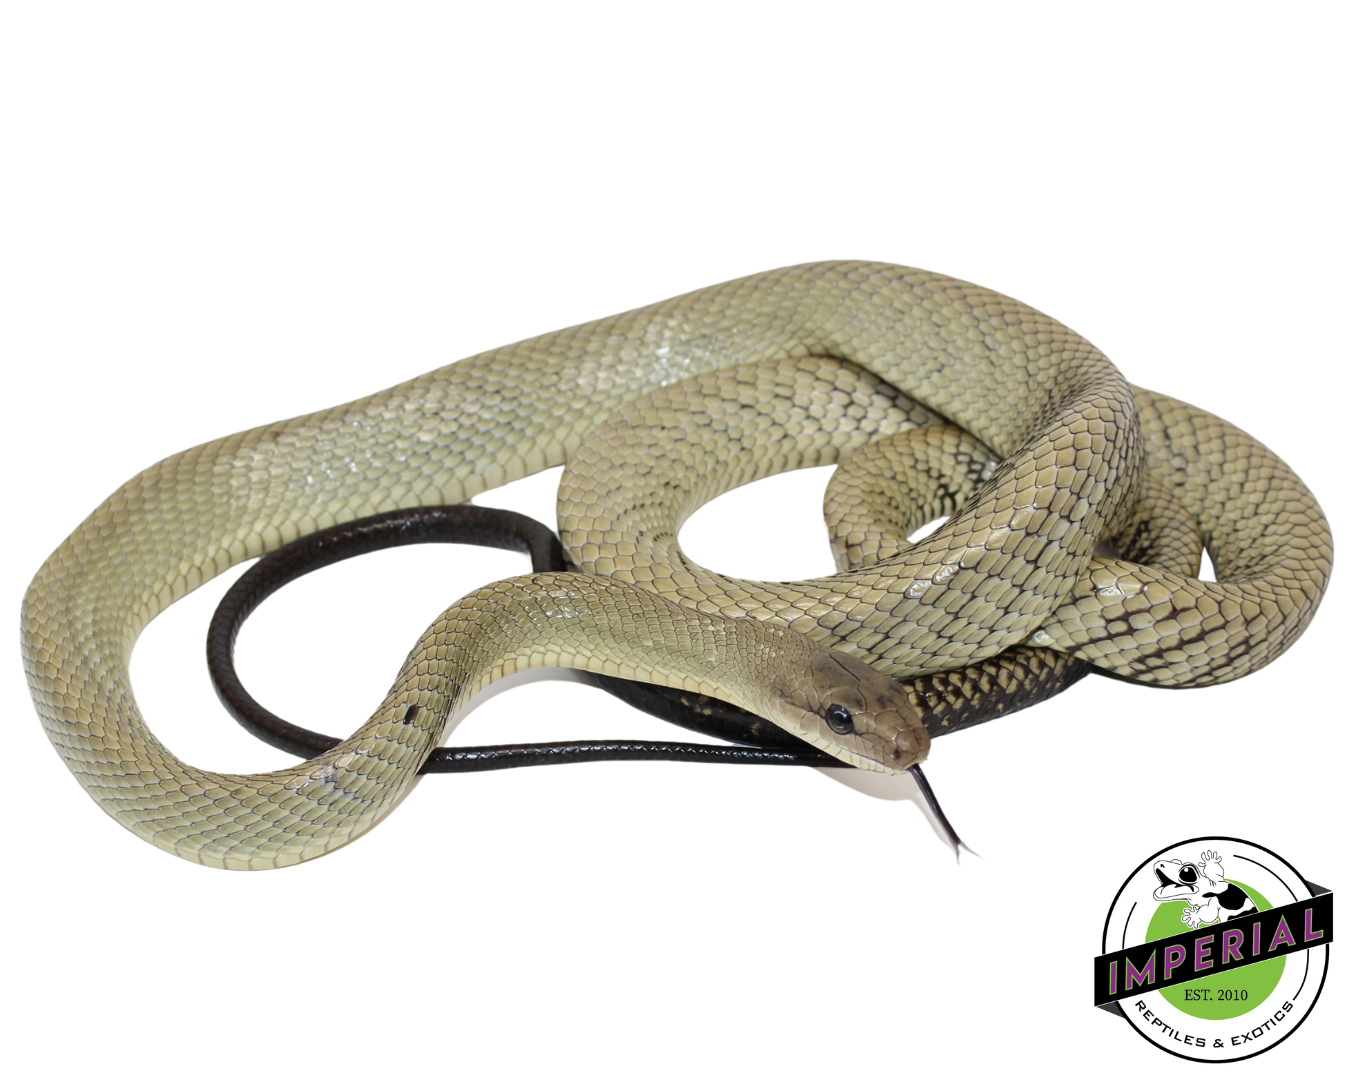 Celebes Black-Tailed Rat Snake for sale, reptiles for sale, buy animals online